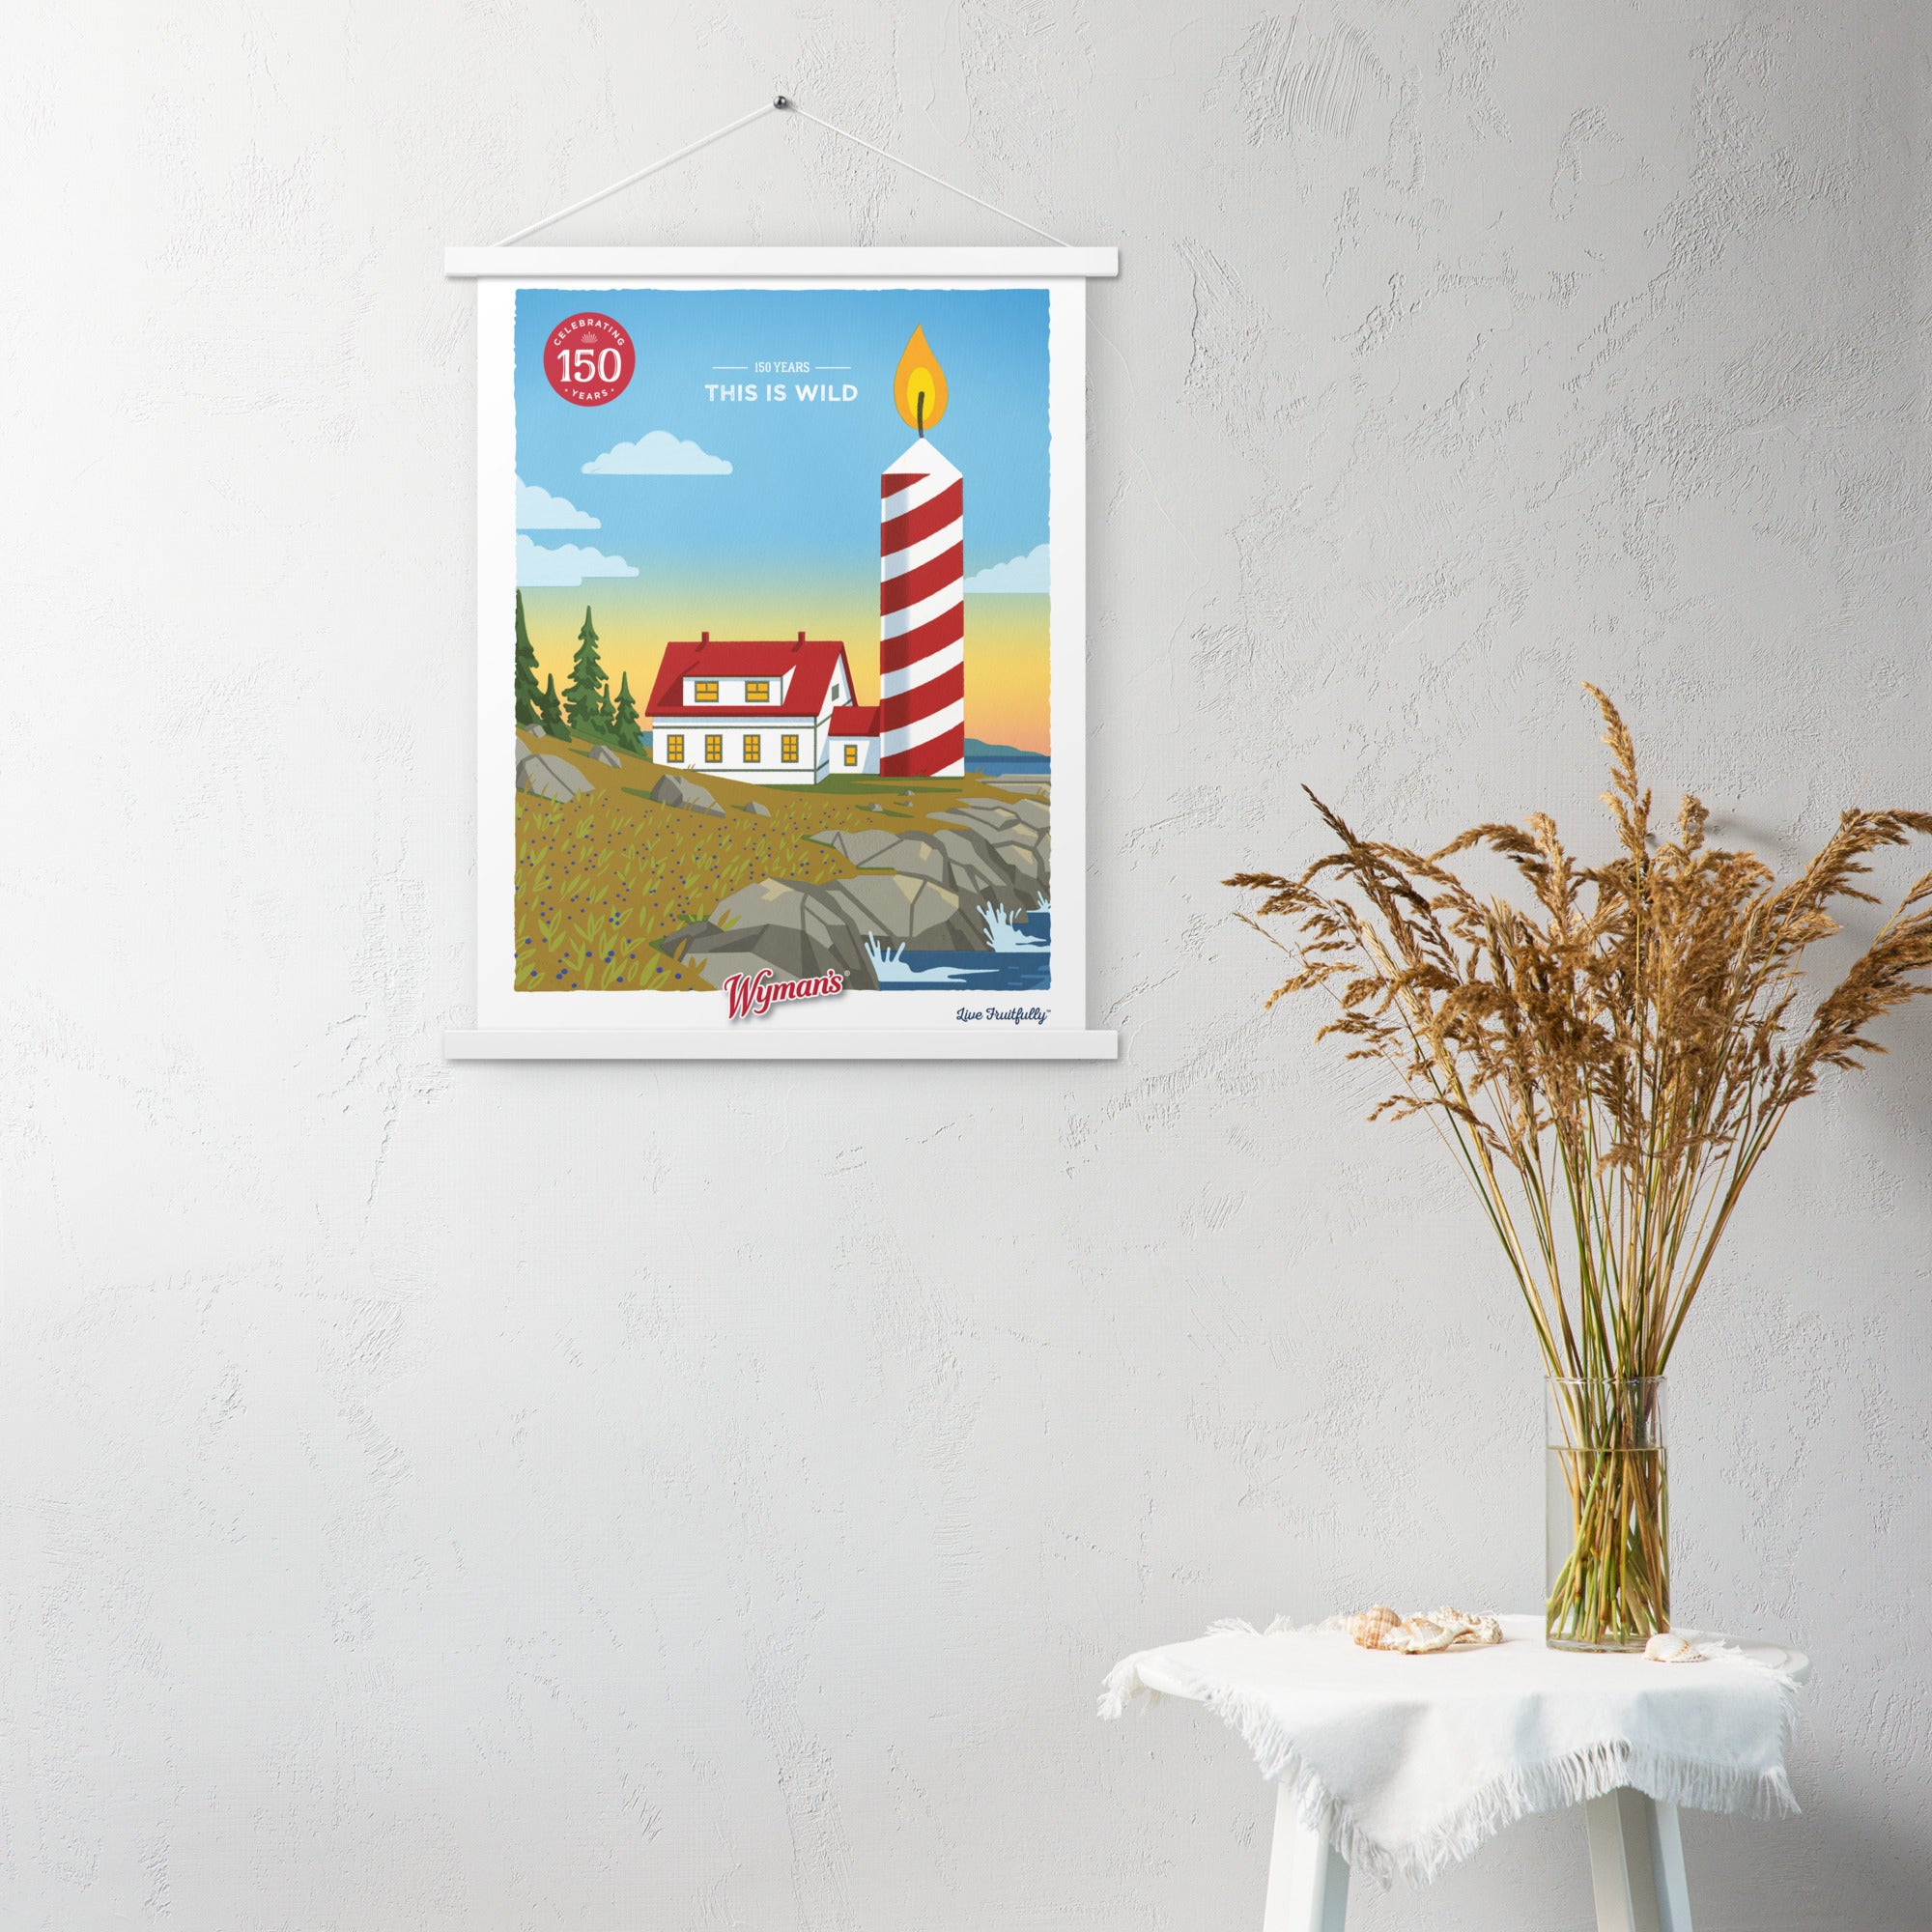 A Shop Wyman's custom poster of a lighthouse hanging on a wall featuring the 150 Years, This is Wild Poster.